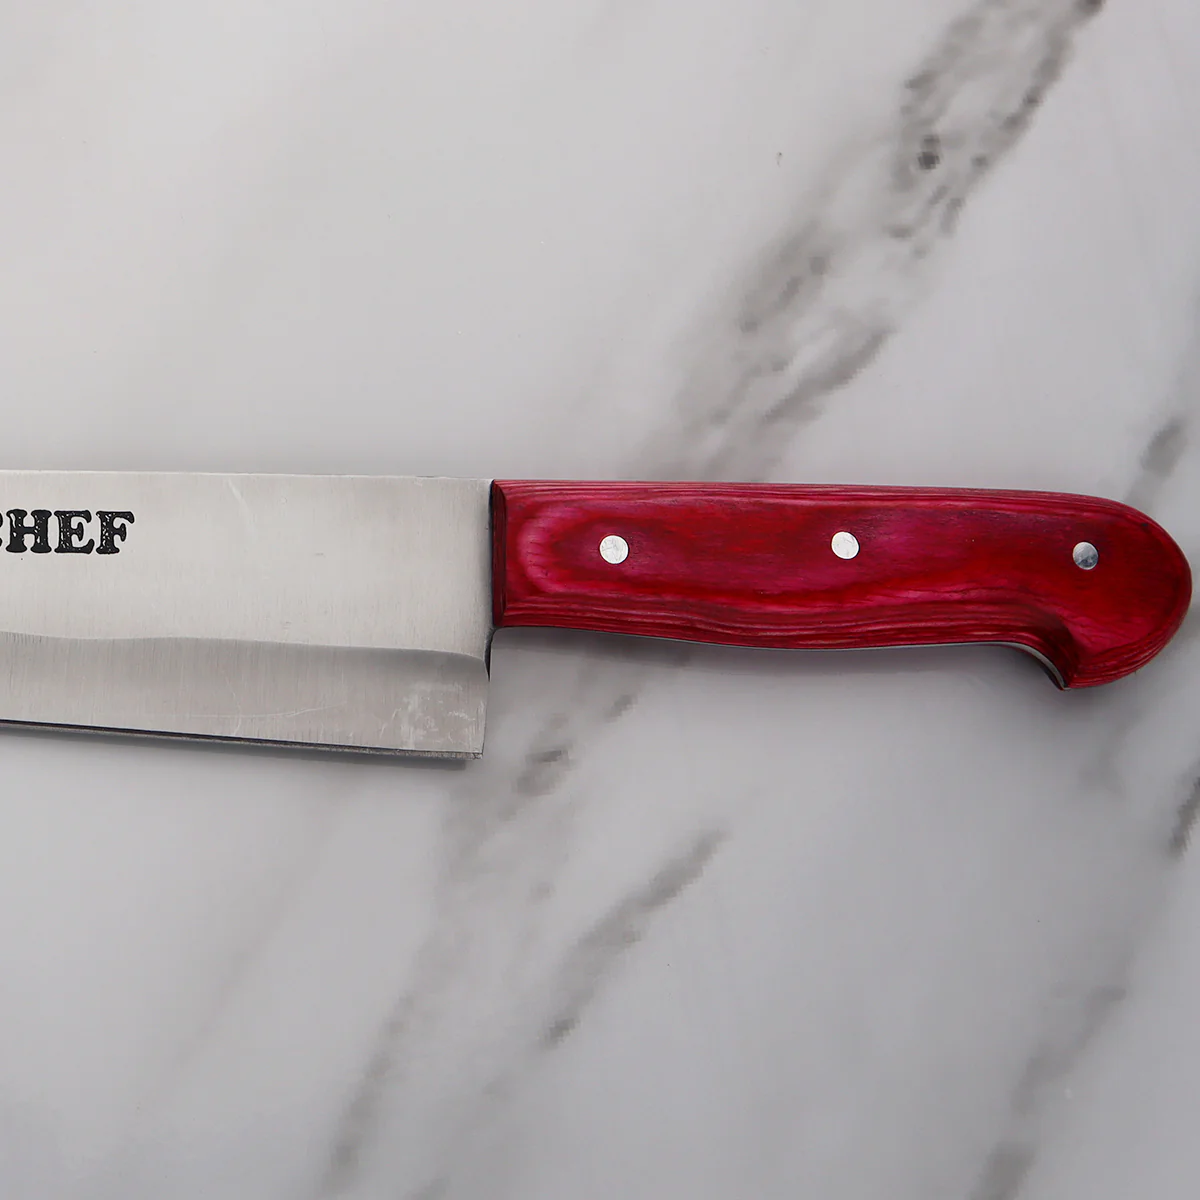 Best Quality Stainless Steel Professional Chef Knife - RED MC Handle Chef's knives are used for cutting meat, dicing vegetables, disjointing some cuts, slicing herbs, and chopping nuts, but there are a number of different varieties for separate purposes, including carving, slicing and bread knives for specific ingredients. Majestic Chef is perfect fit for your kitchen...